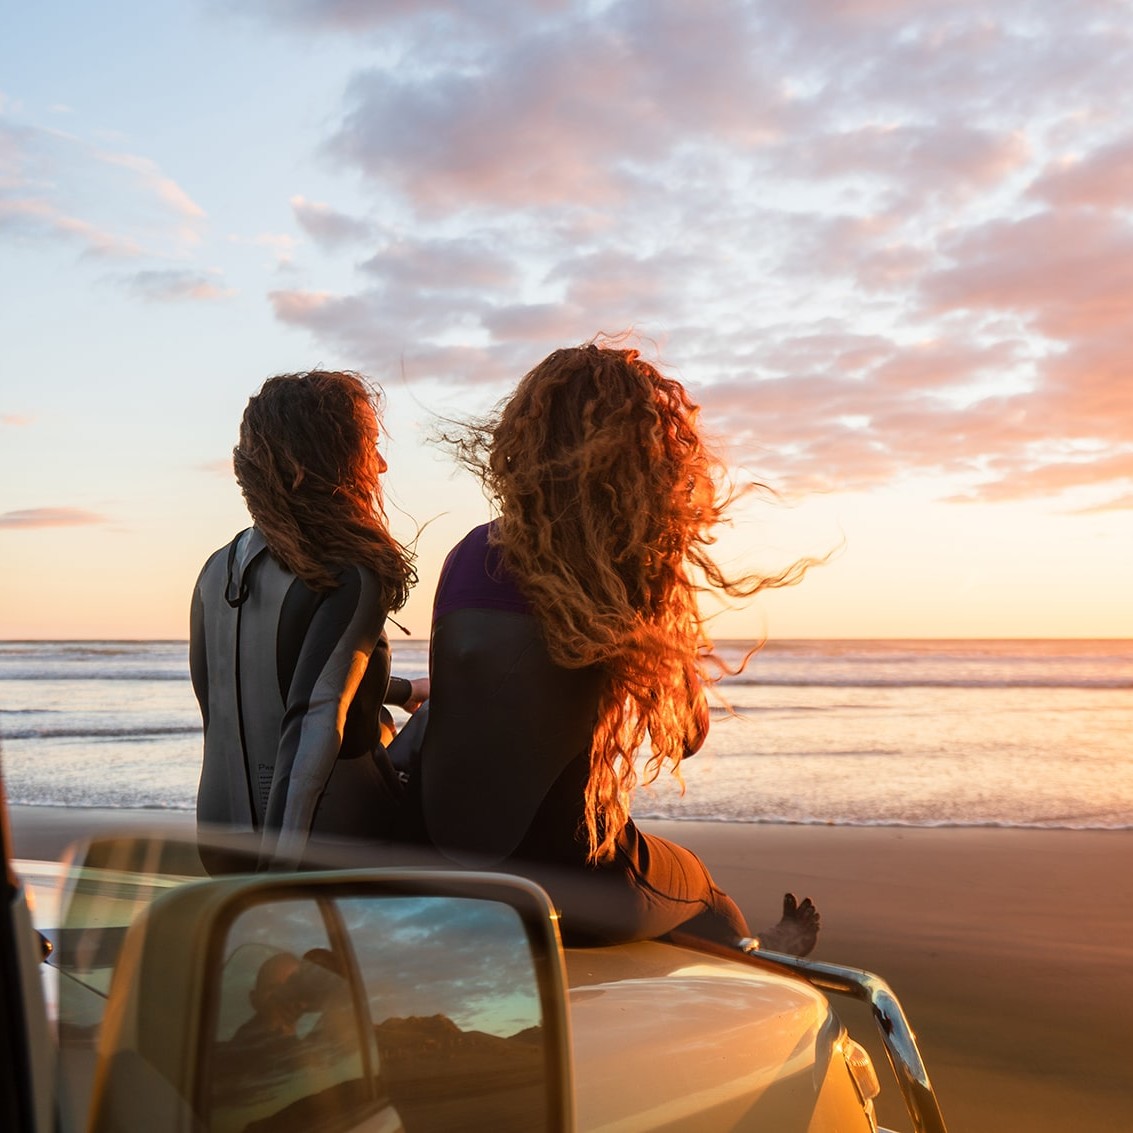 girls sitting on car bonnet looking at beach at sunset